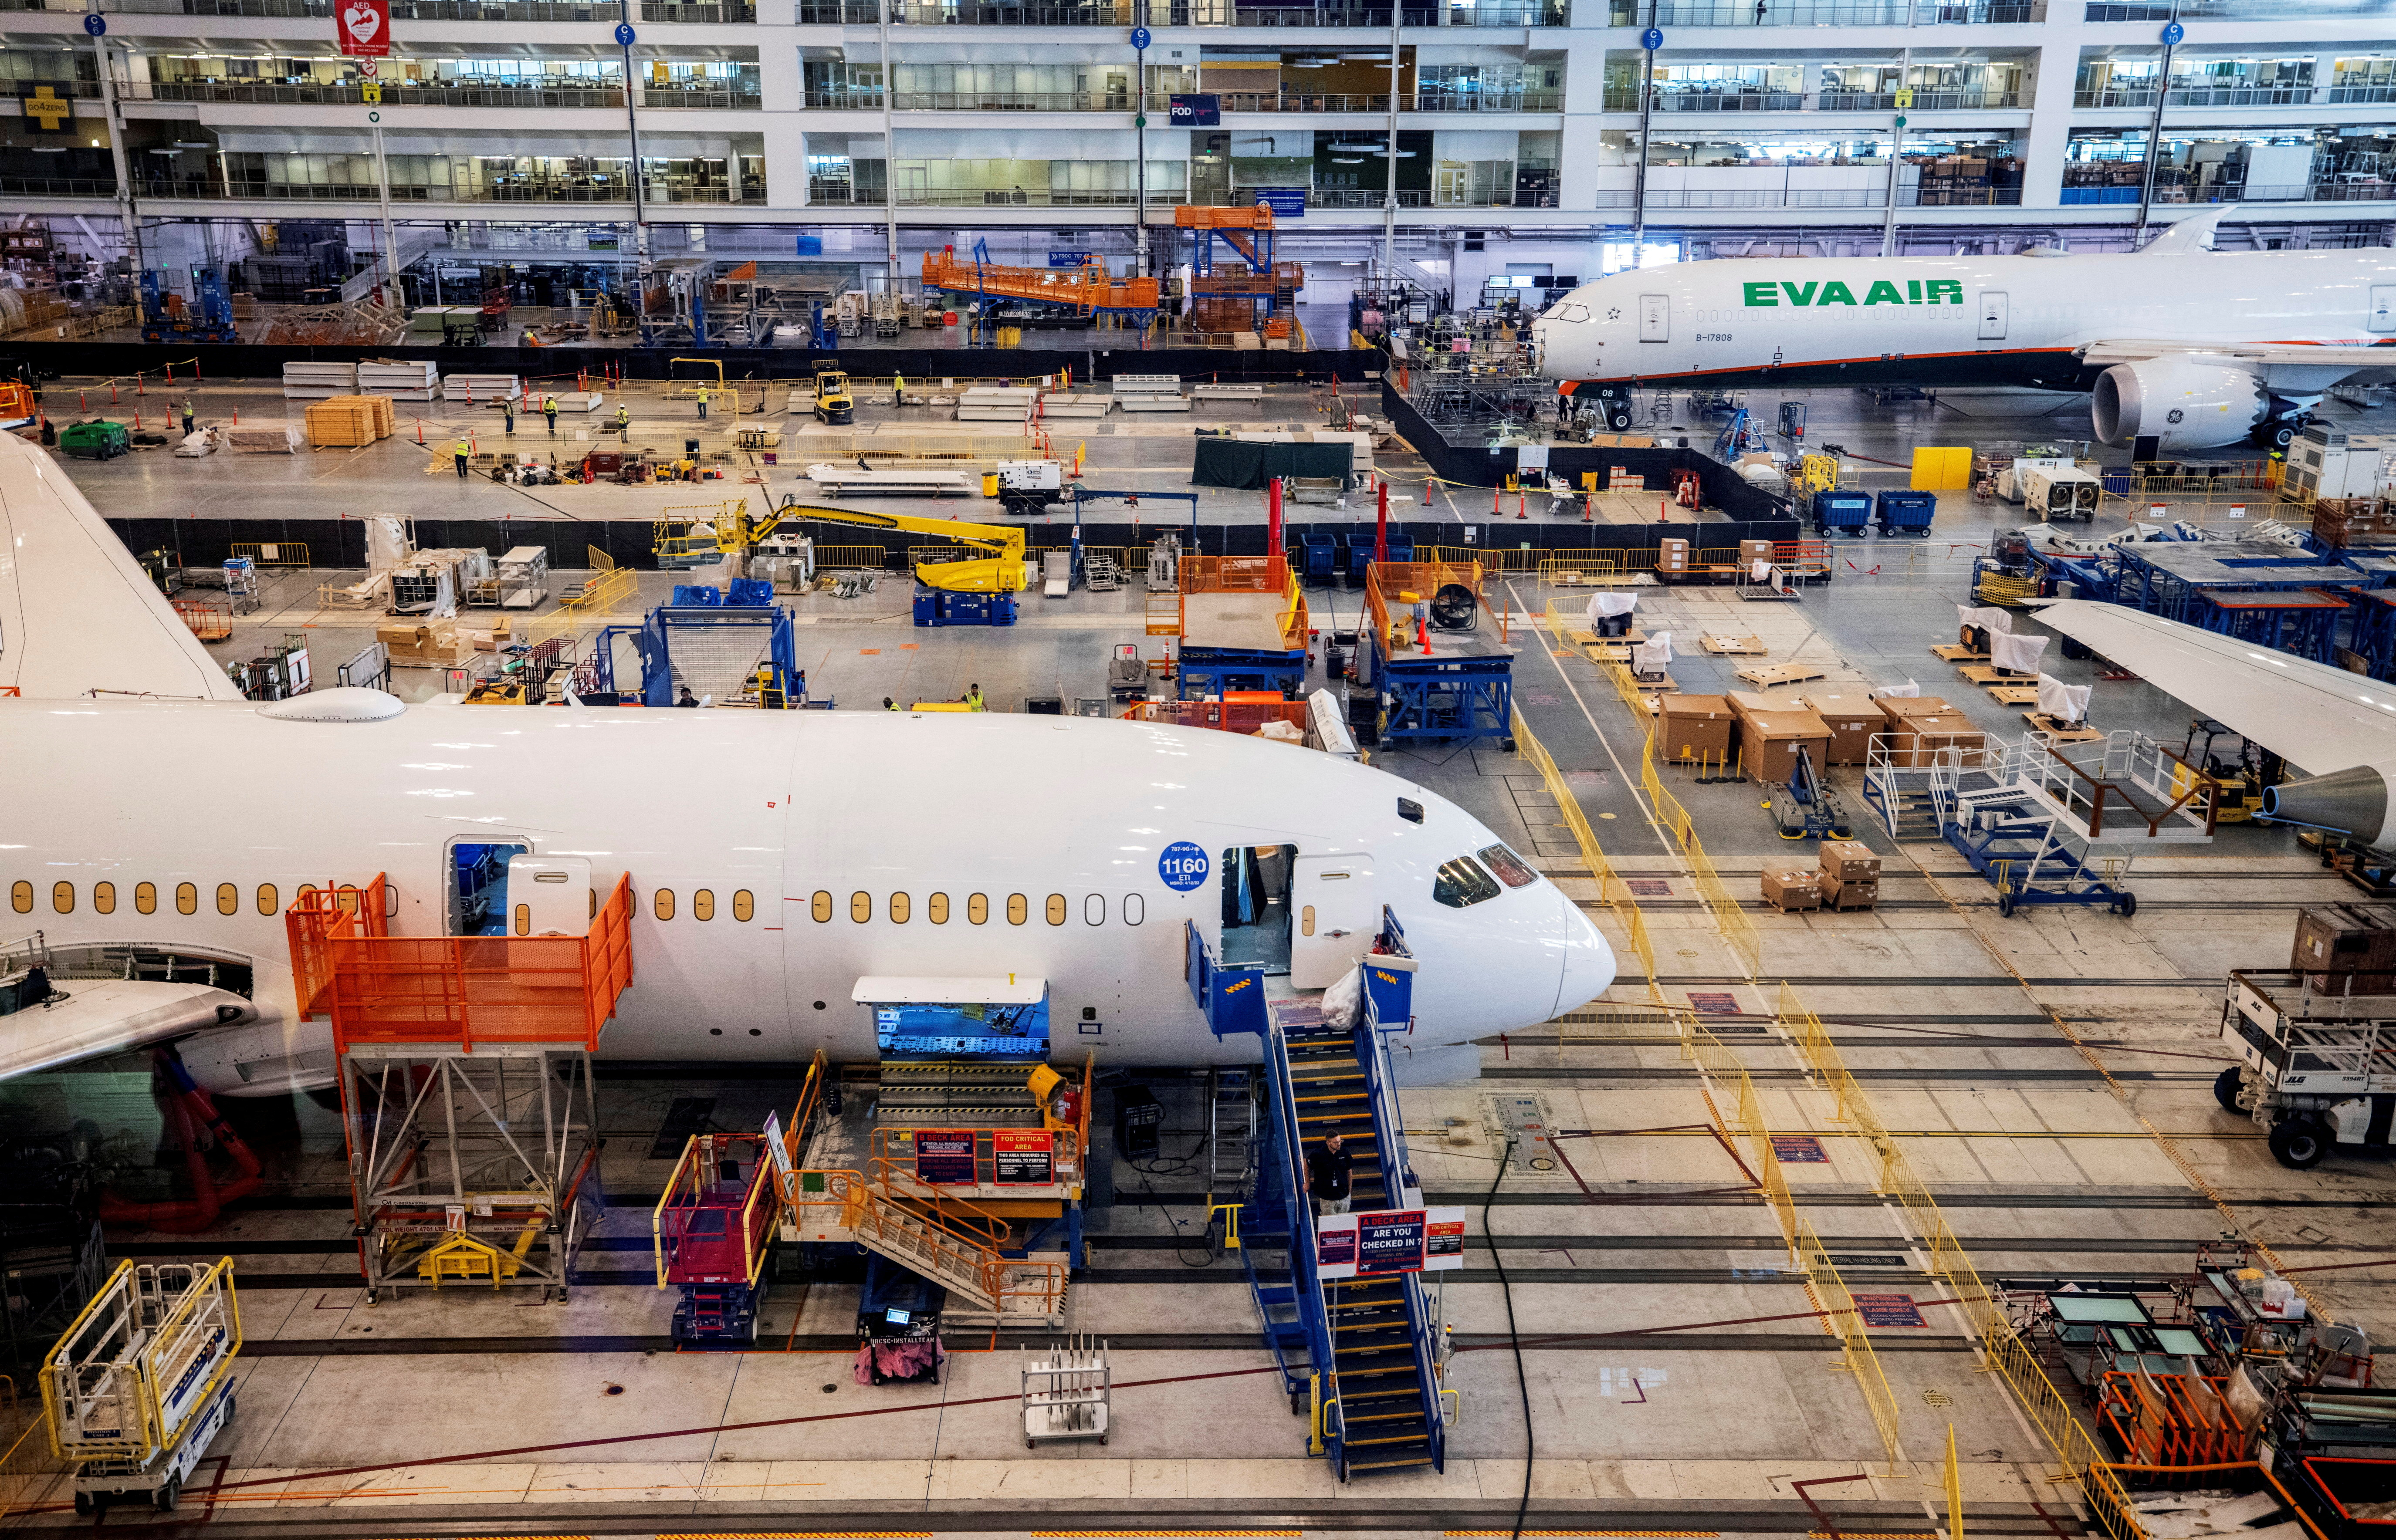 Boeing employees assemble 787s inside their main assembly building on their campus in North Charleston, South Carolina